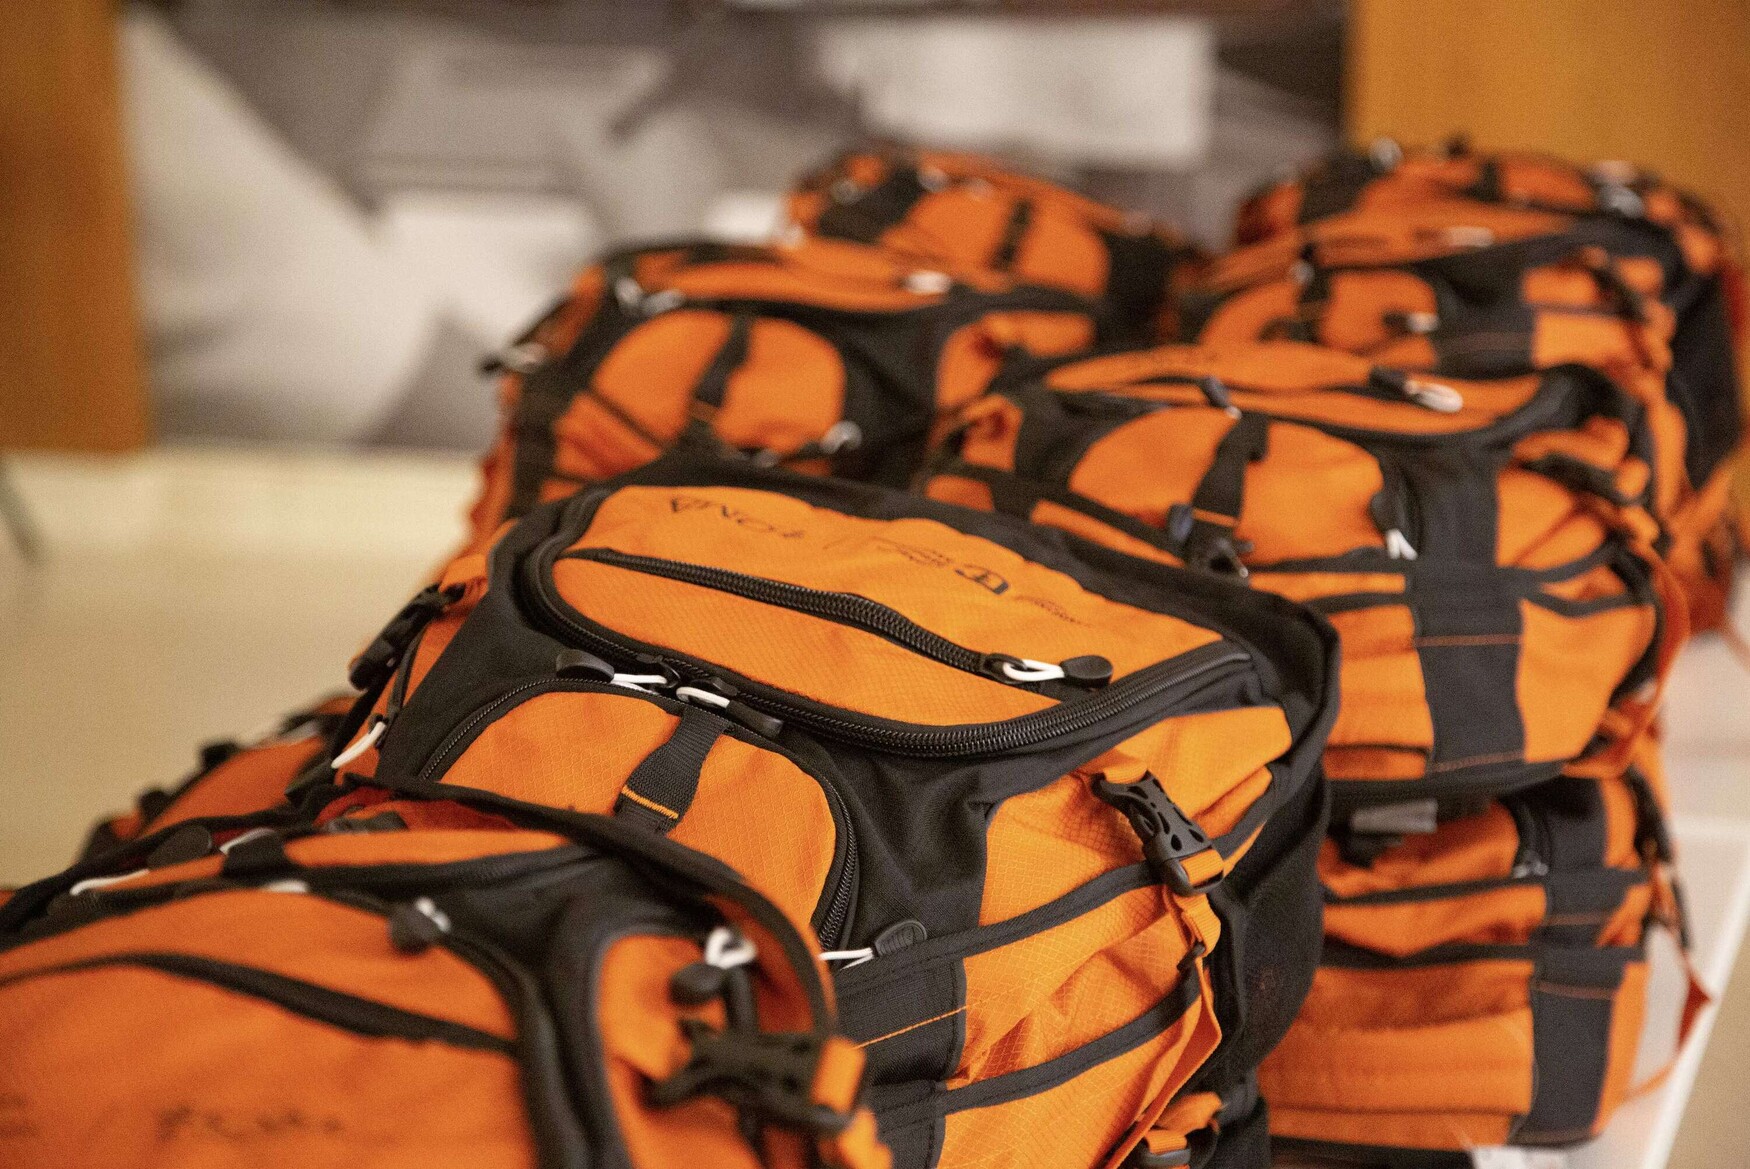 Orange Backpacks for the Class of 2T5